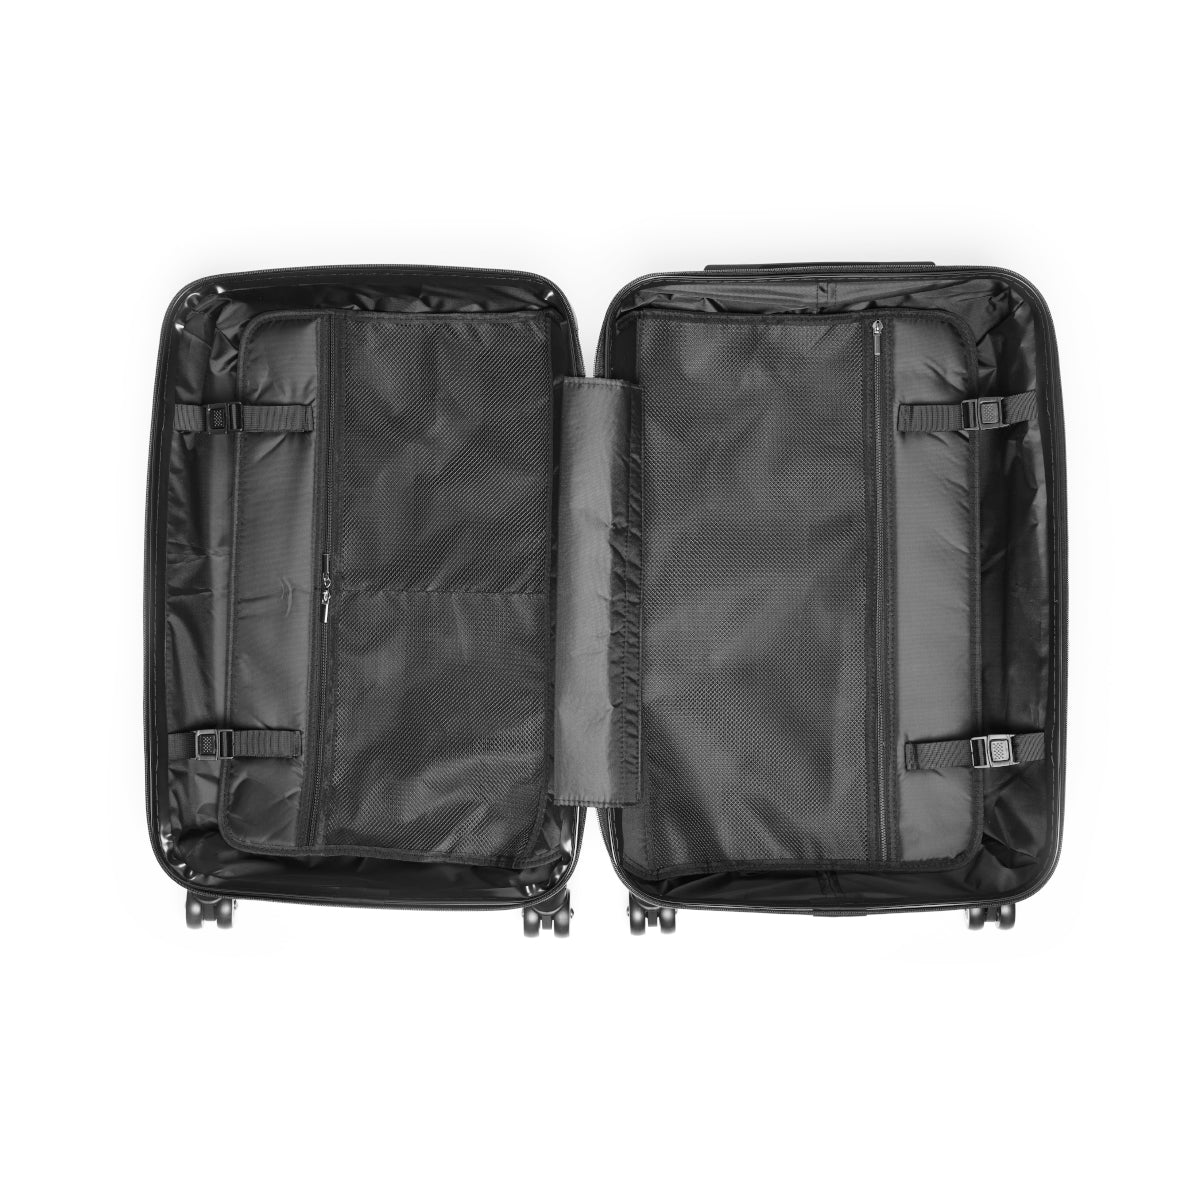 Getrott Rembrandt Laughing by Rembrandt Black Cabin Suitcase Inner Pockets Extended Storage Adjustable Telescopic Handle Inner Pockets Double wheeled Polycarbonate Hard-shell Built-in Lock